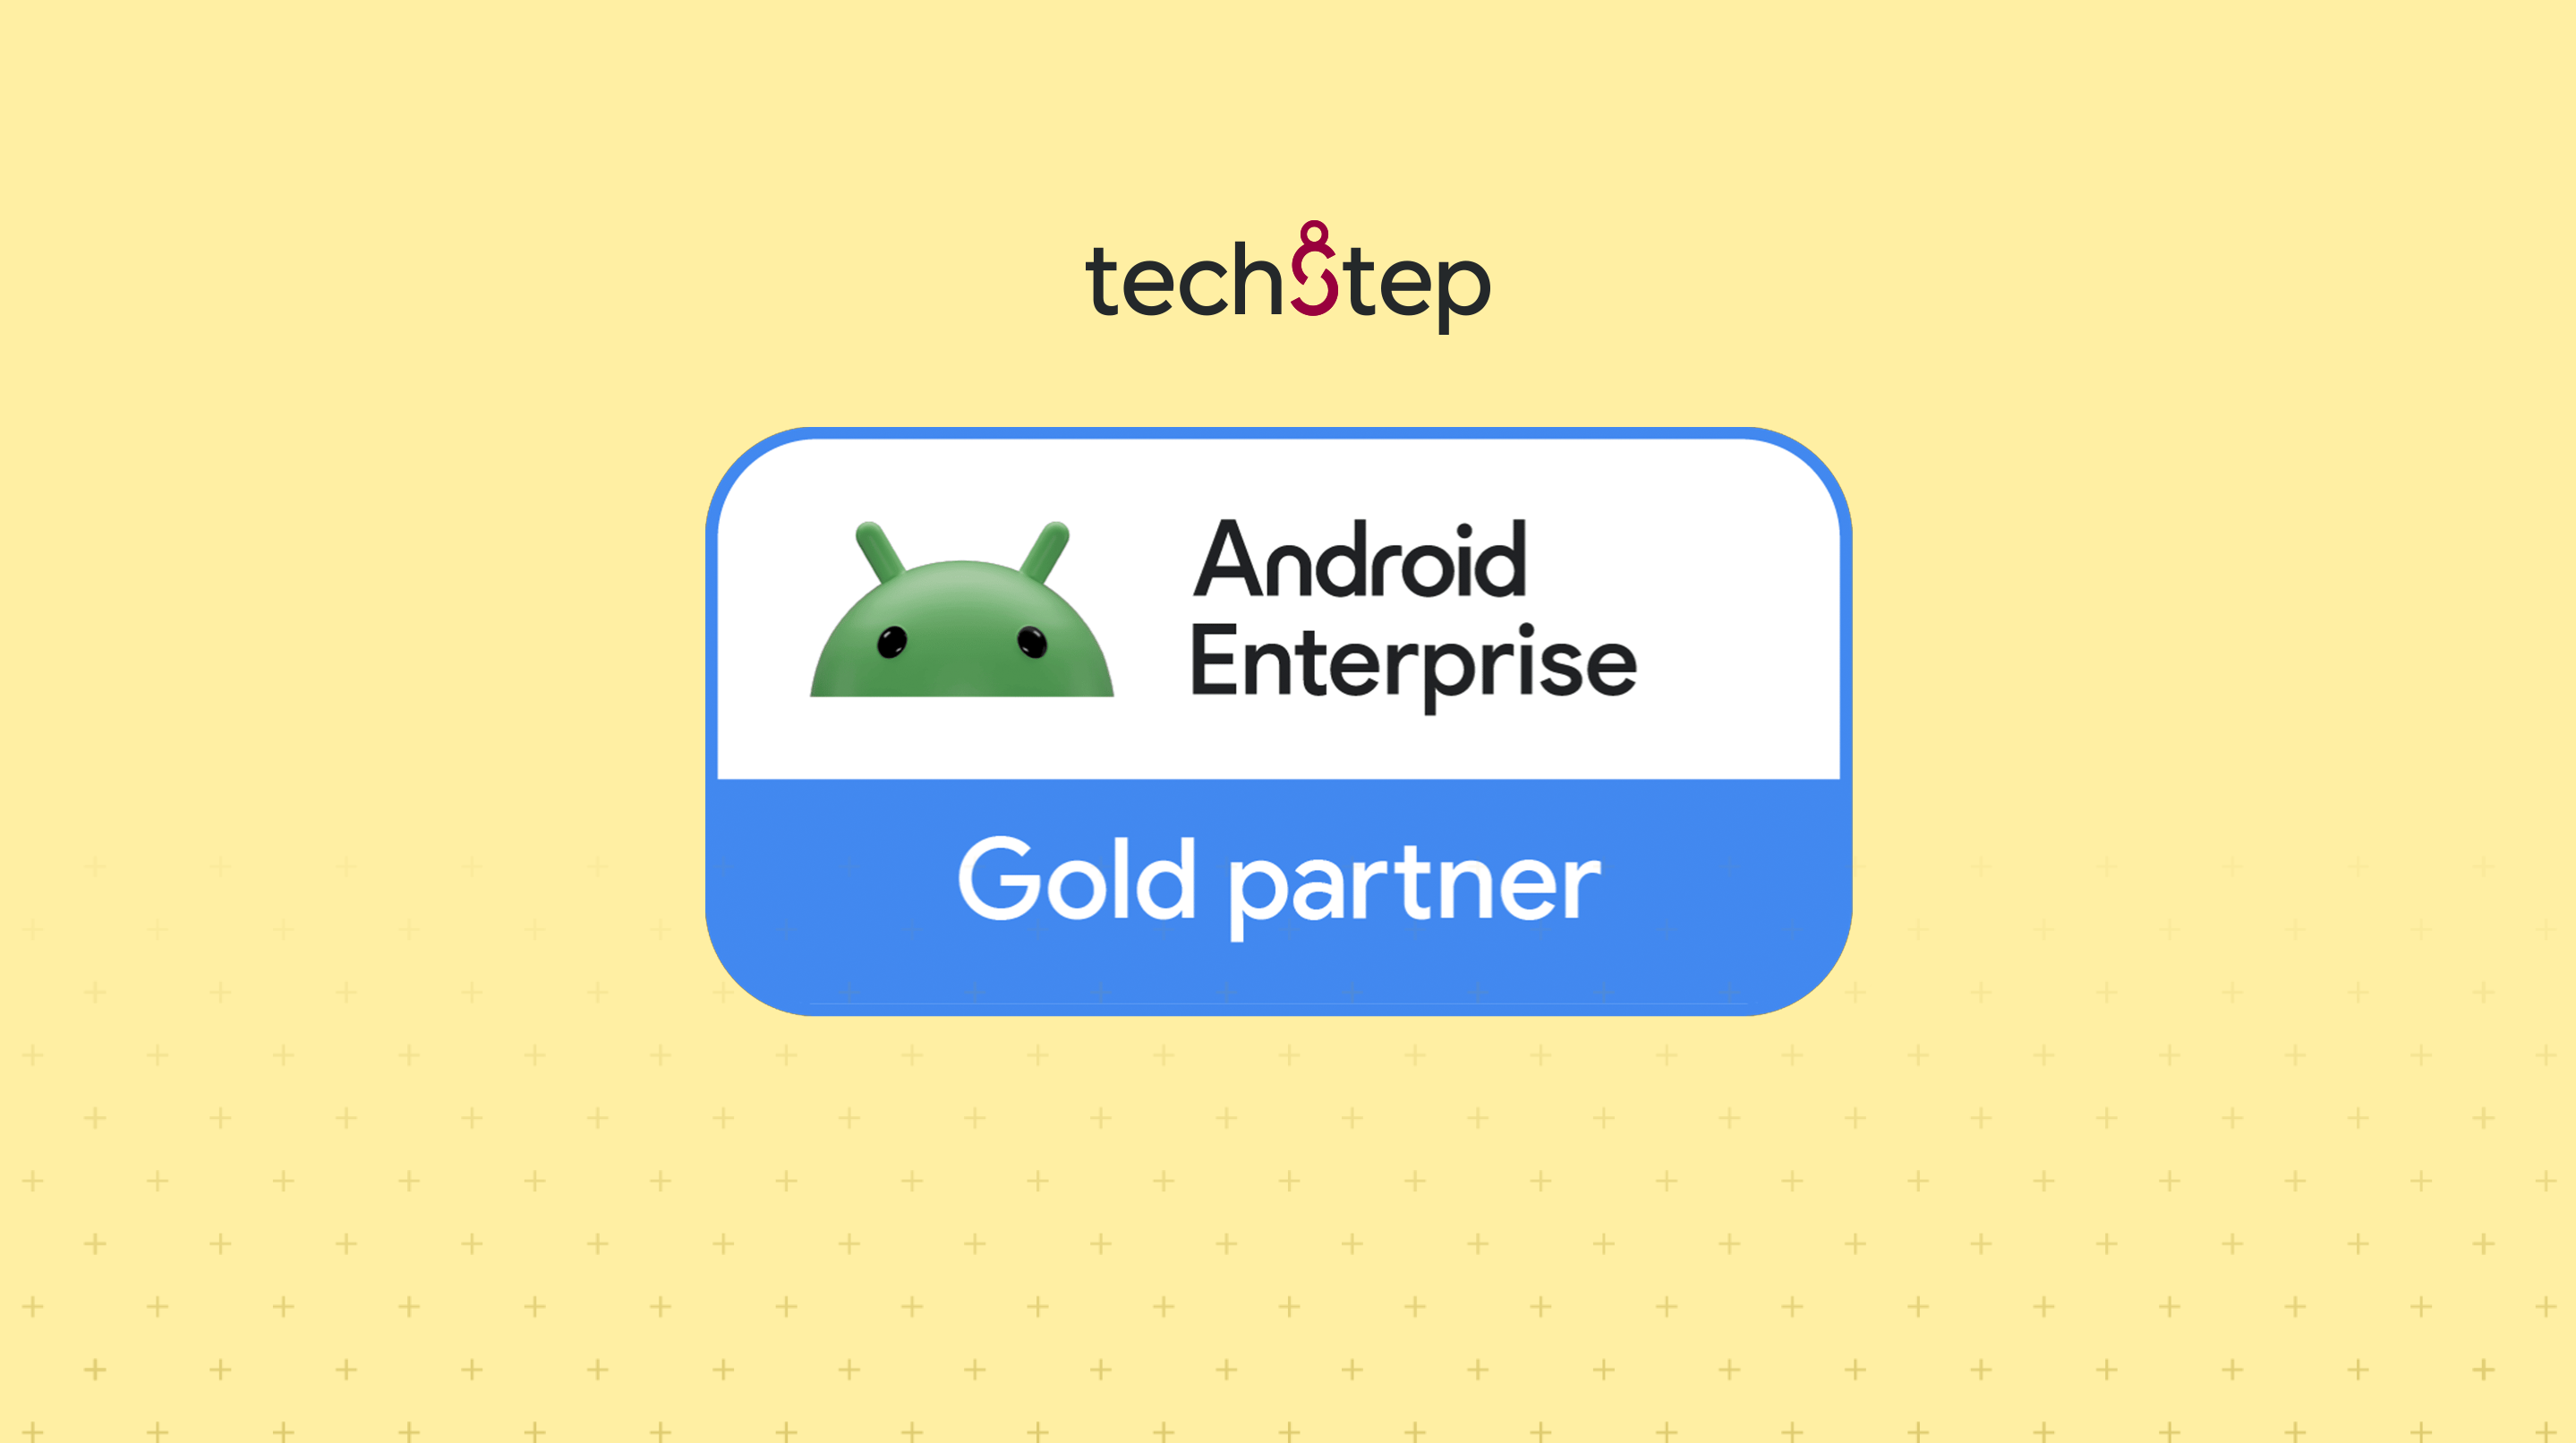 Techstep becomes a Gold partner in the Android Enterprise Partner program